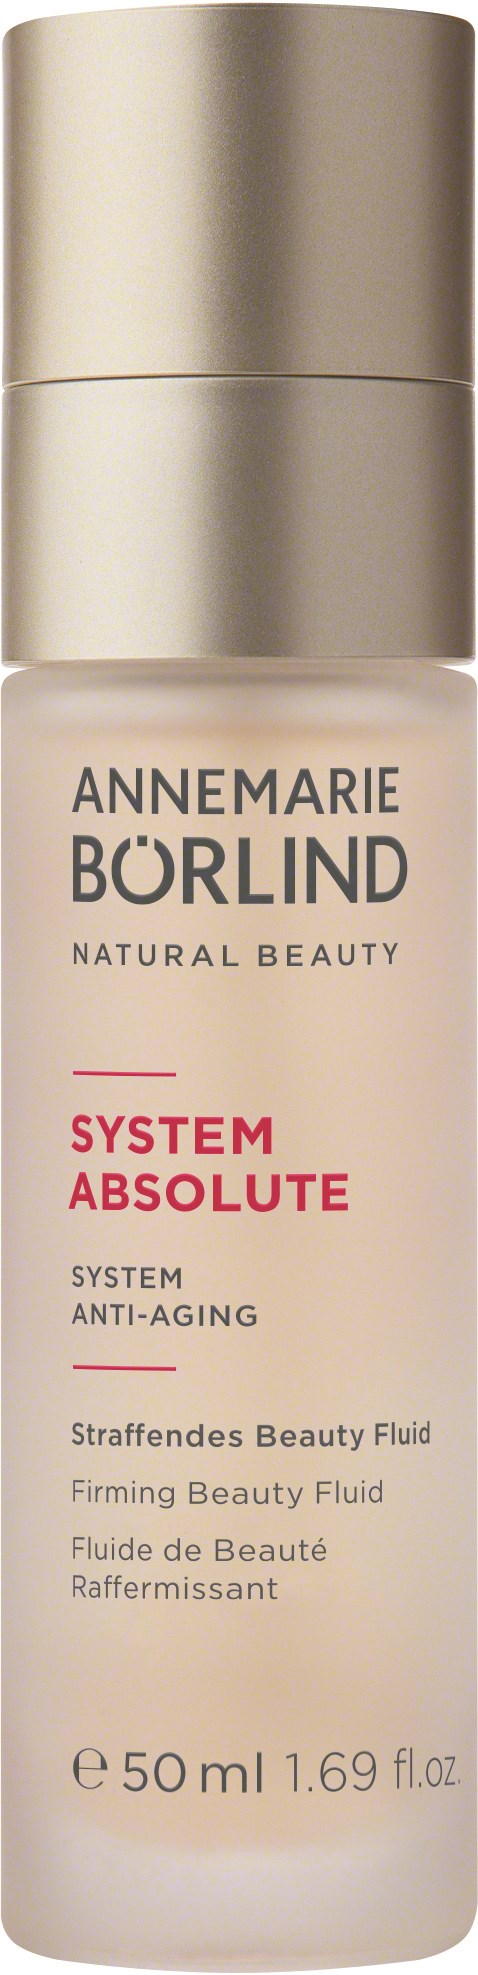 System Absolute Anti-Aging Beauty Fluid